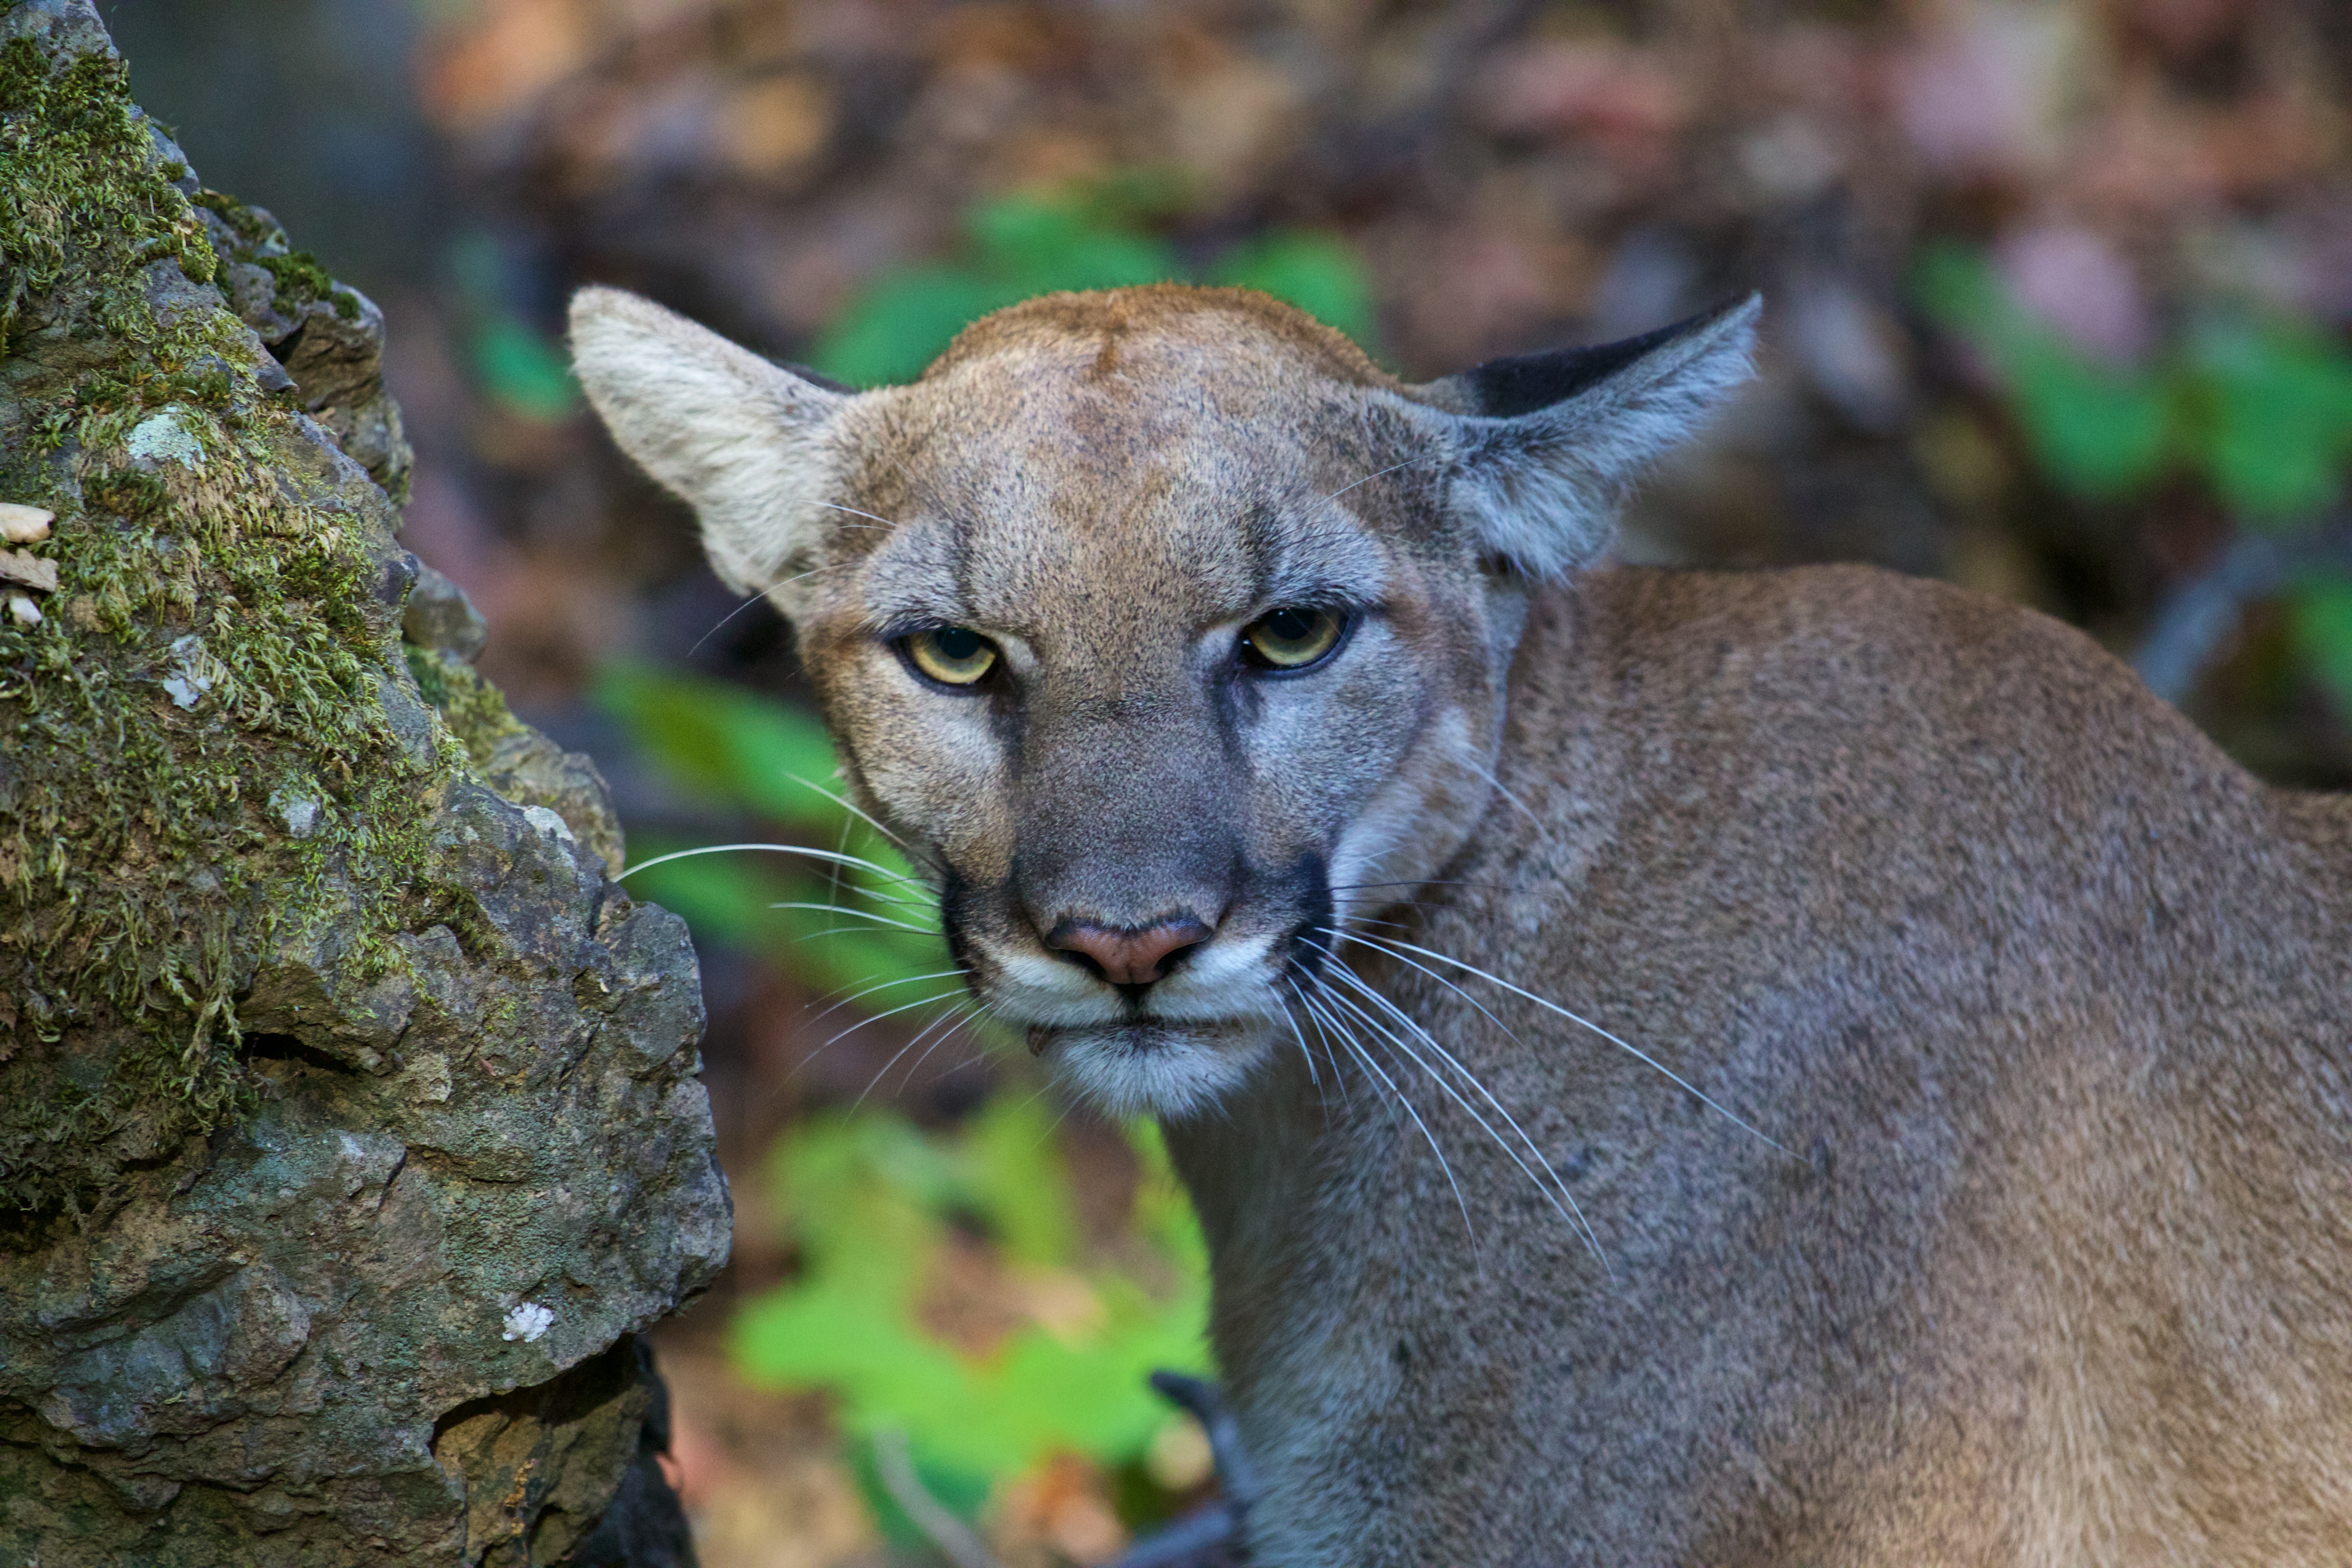 Photo of P-42, a female mountain lion that biologists tracked in the Santa Monica Mountains